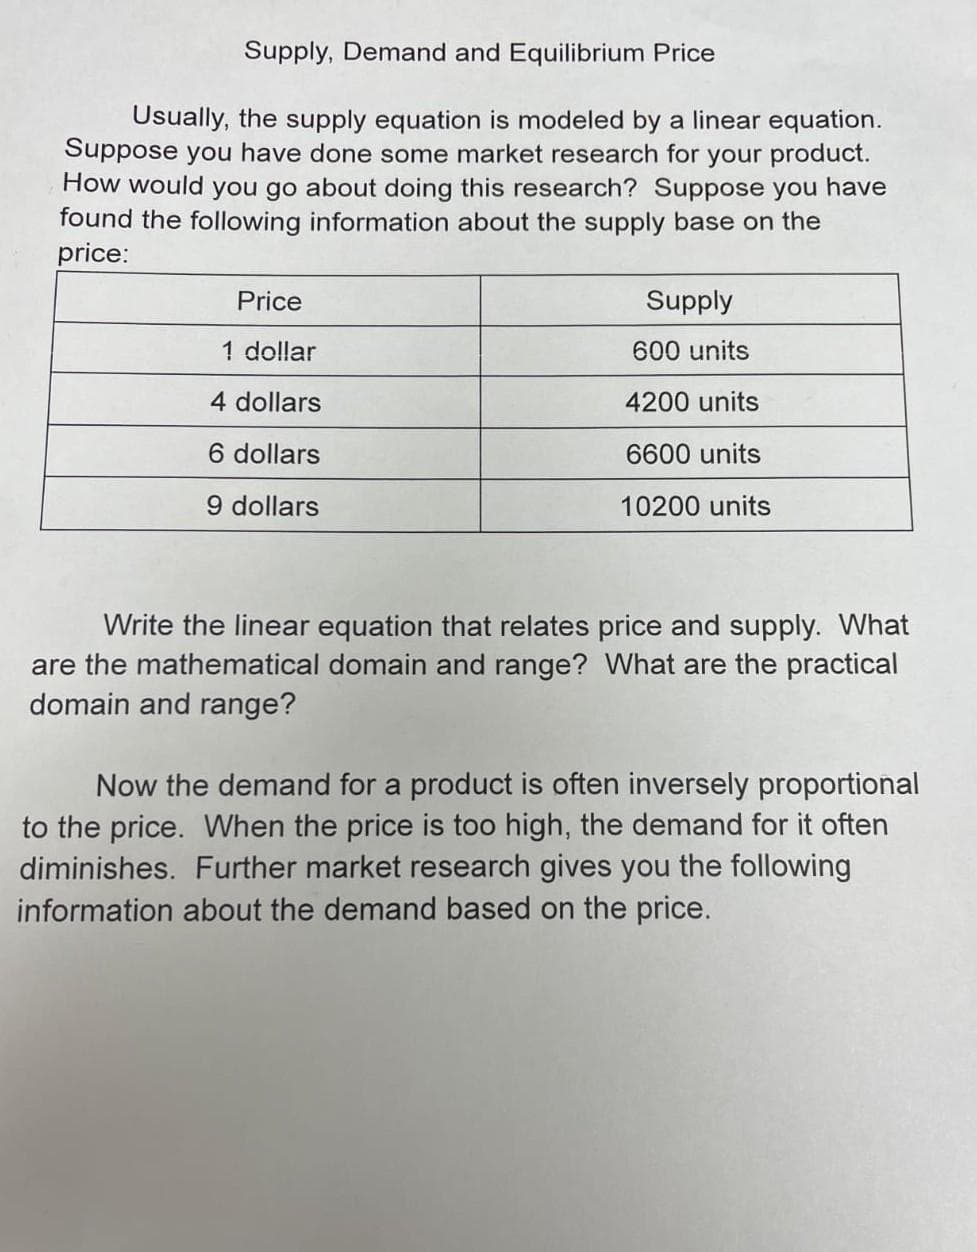 Supply, Demand and Equilibrium Price
Usually, the supply equation is modeled by a linear equation.
Suppose you have done some market research for your product.
How would you go about doing this research? Suppose you have
found the following information about the supply base on the
price:
Price
1 dollar
4 dollars
6 dollars
9 dollars
Supply
600 units
4200 units
6600 units
10200 units
Write the linear equation that relates price and supply. What
are the mathematical domain and range? What are the practical
domain and range?
Now the demand for a product is often inversely proportional
to the price. When the price is too high, the demand for it often
diminishes. Further market research gives you the following
information about the demand based on the price.